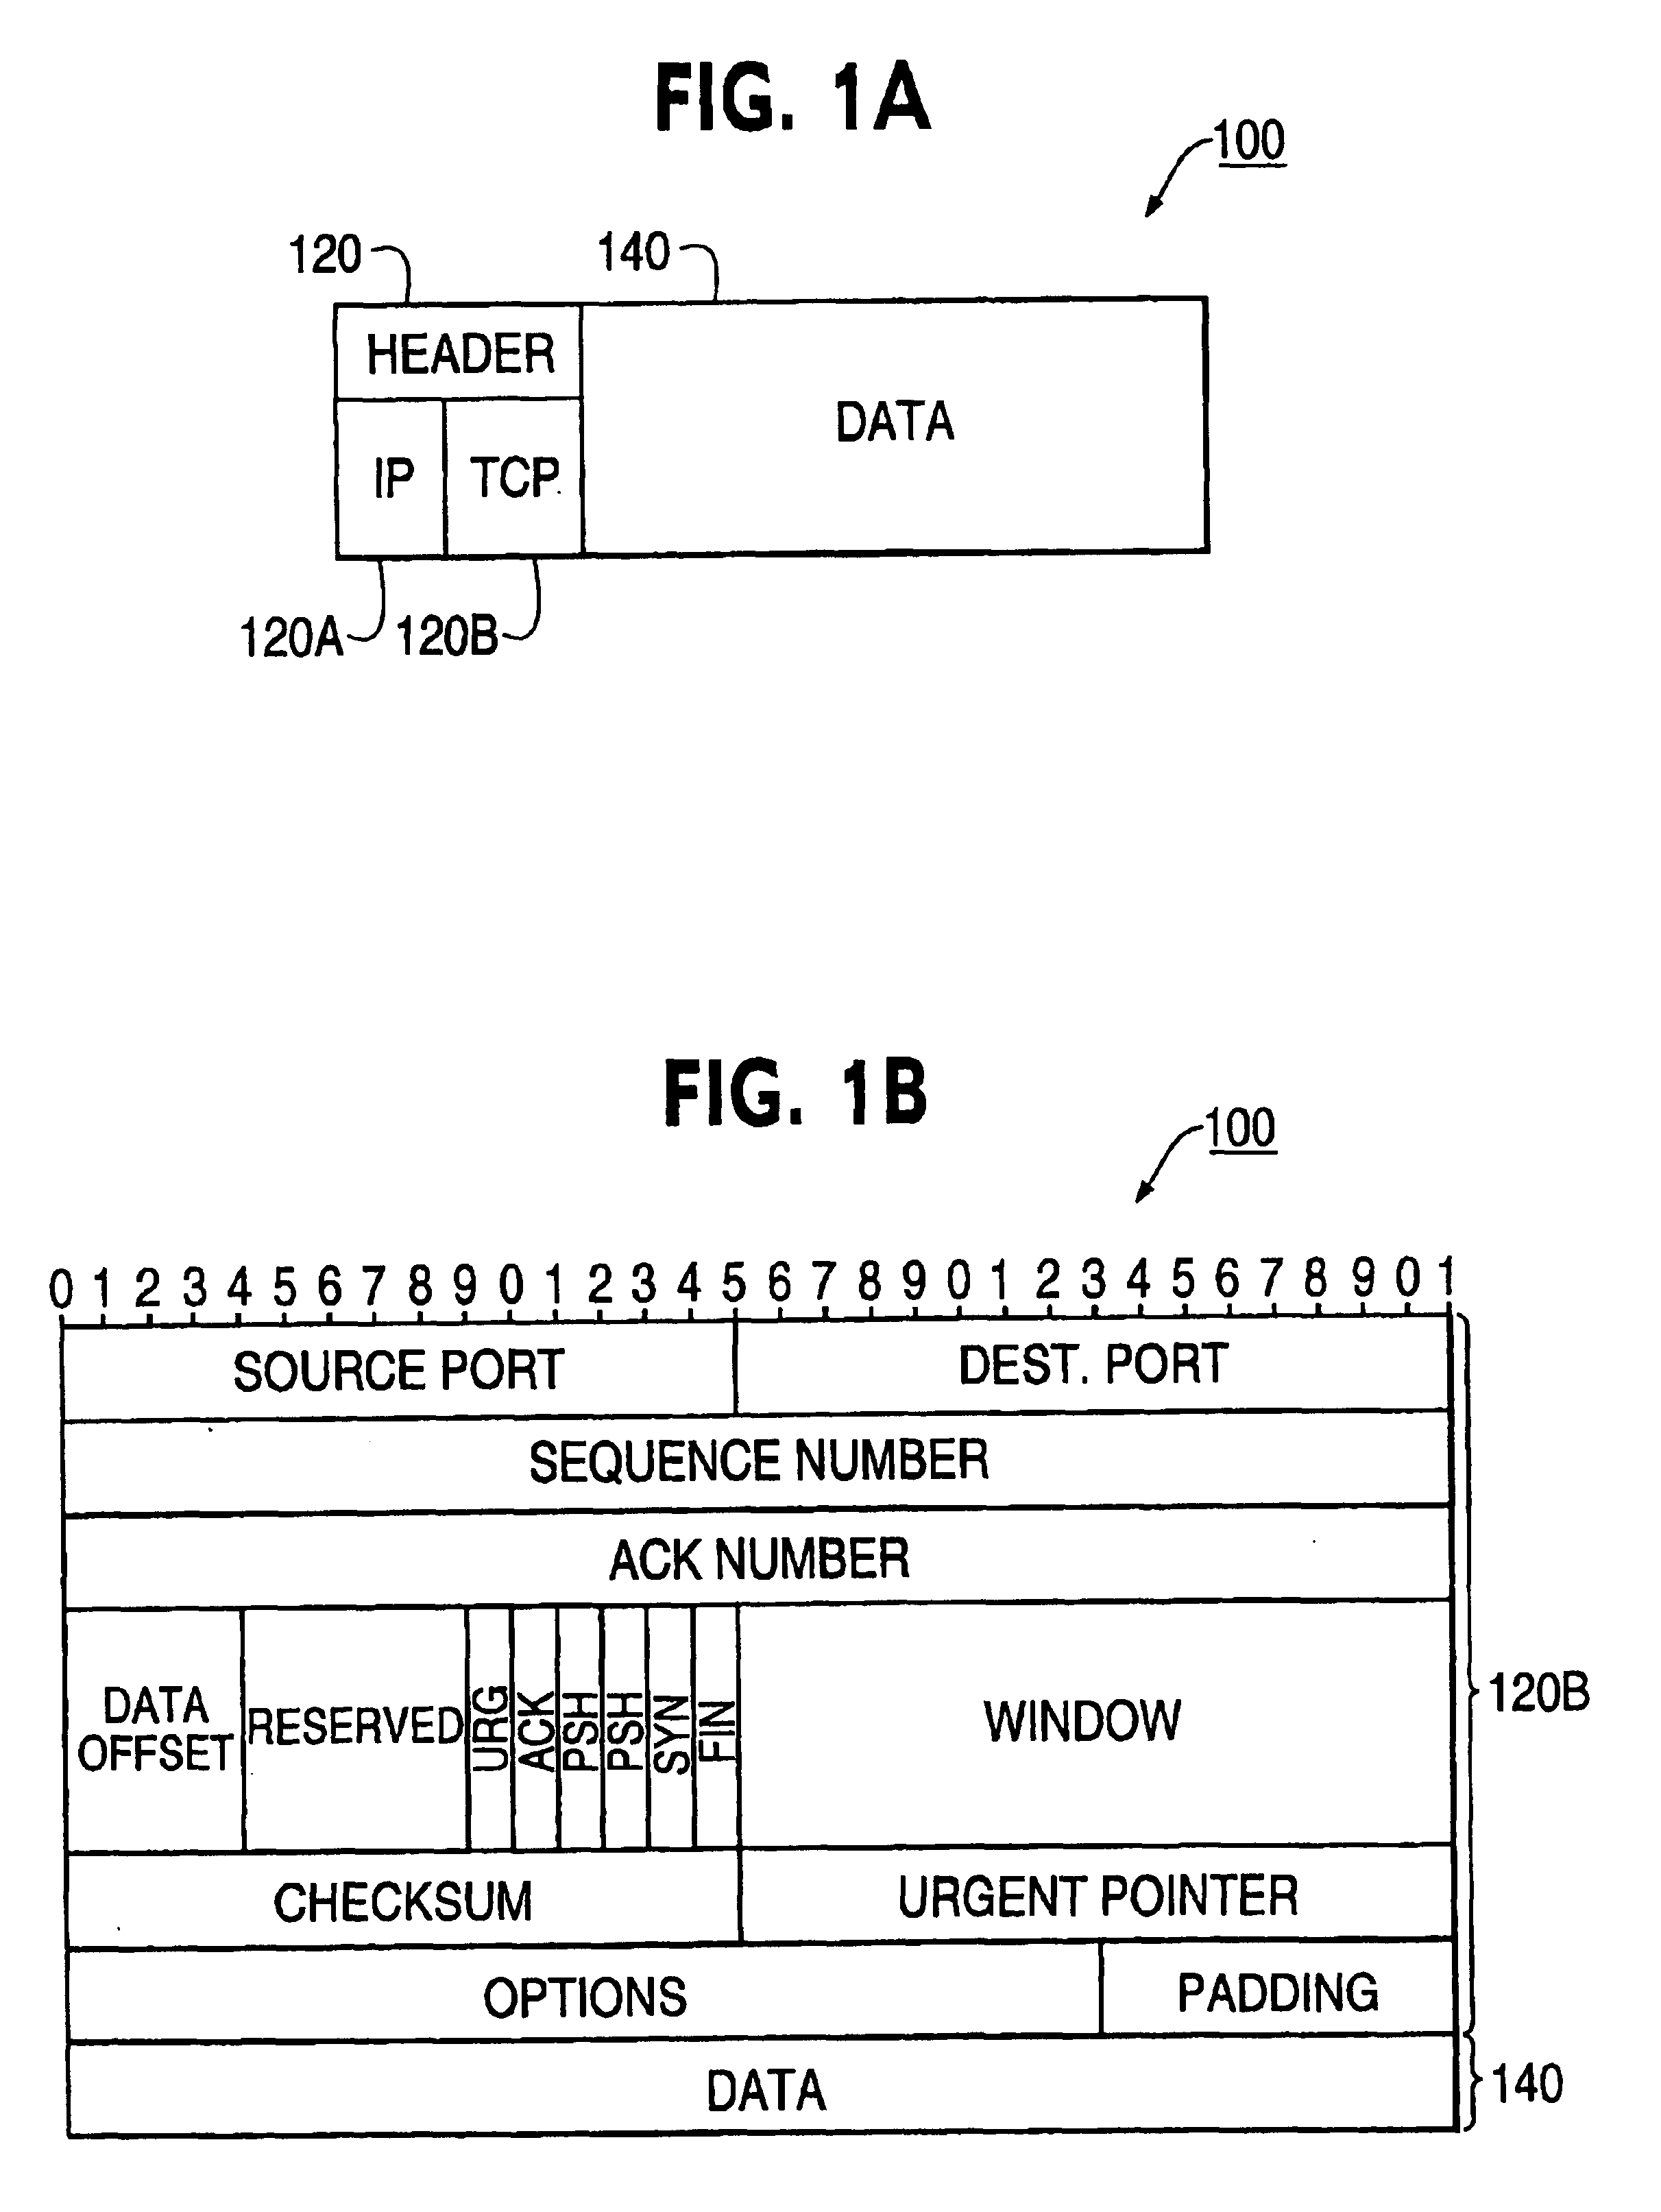 Enhancement of explicit congestion notification (ECN) for wireless network applications